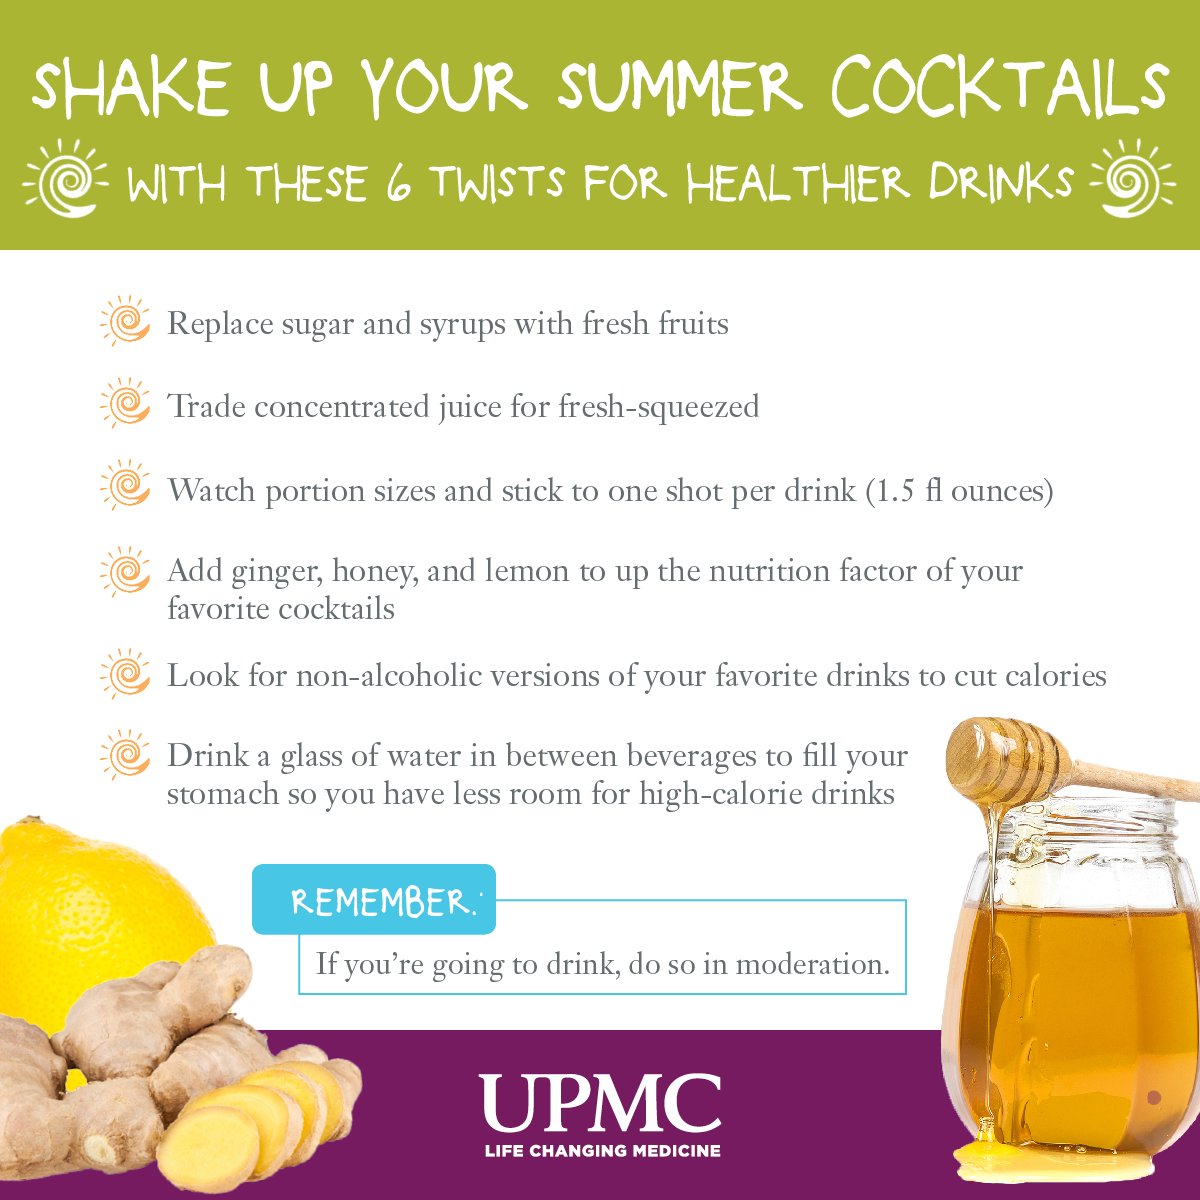 use these healthy drink tips and recipes